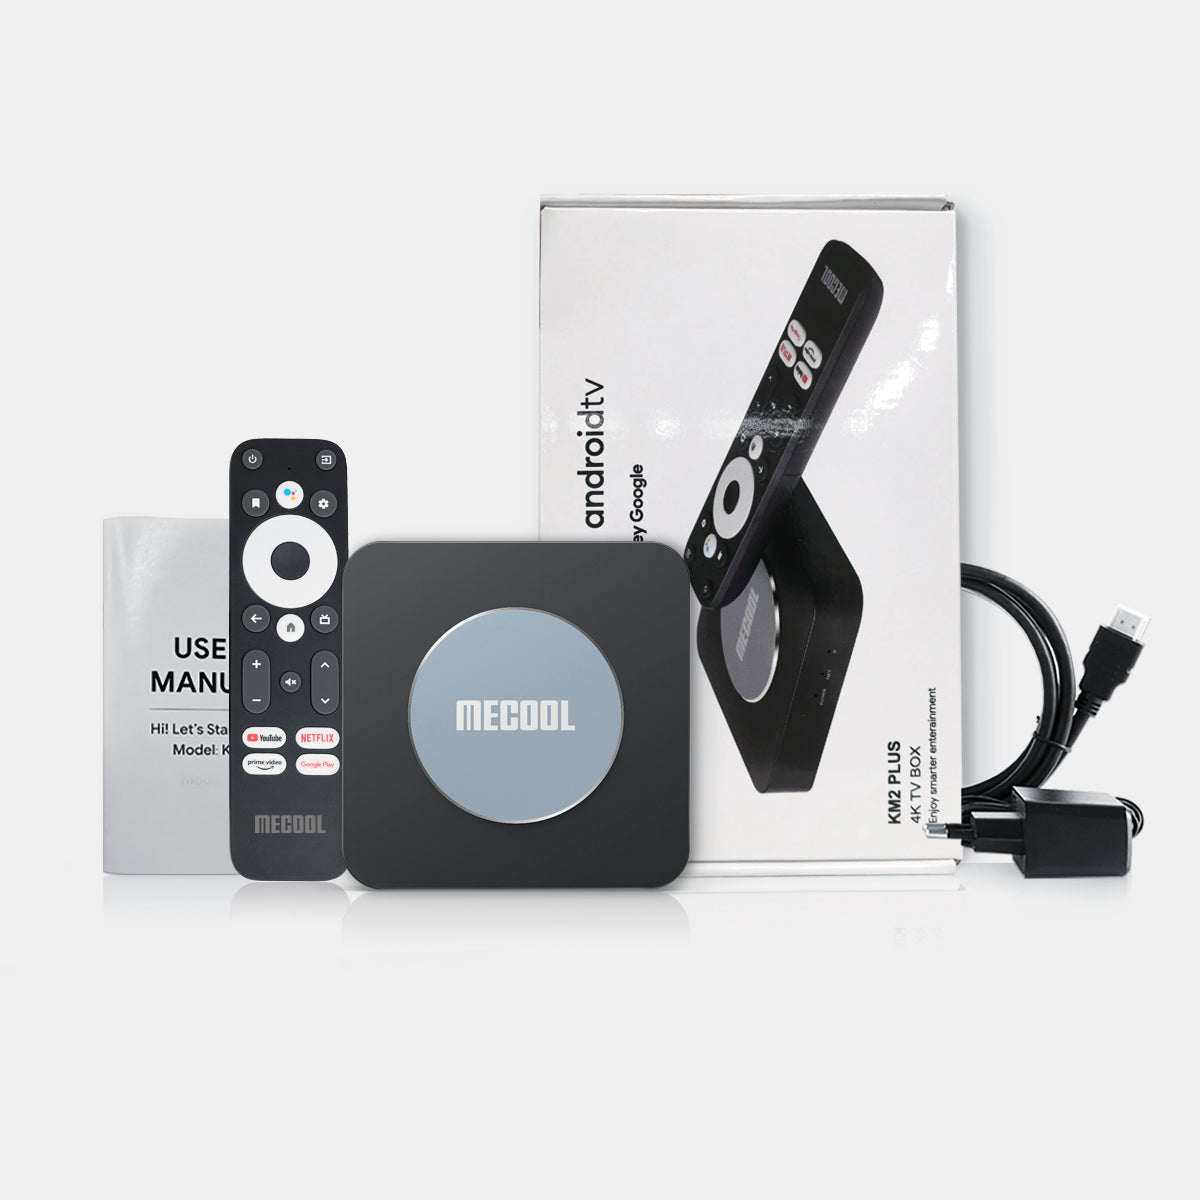 Mecool KM2 Plus Deluxe Android 11 Beelink Tv Box With Amlogic S905X4,  Google Certified, Netflix, 4K, 5G WiFi, 6 Dolby Atmos Audio, And Abeelink  Tv Box Functionality From Arthur032, $72.05